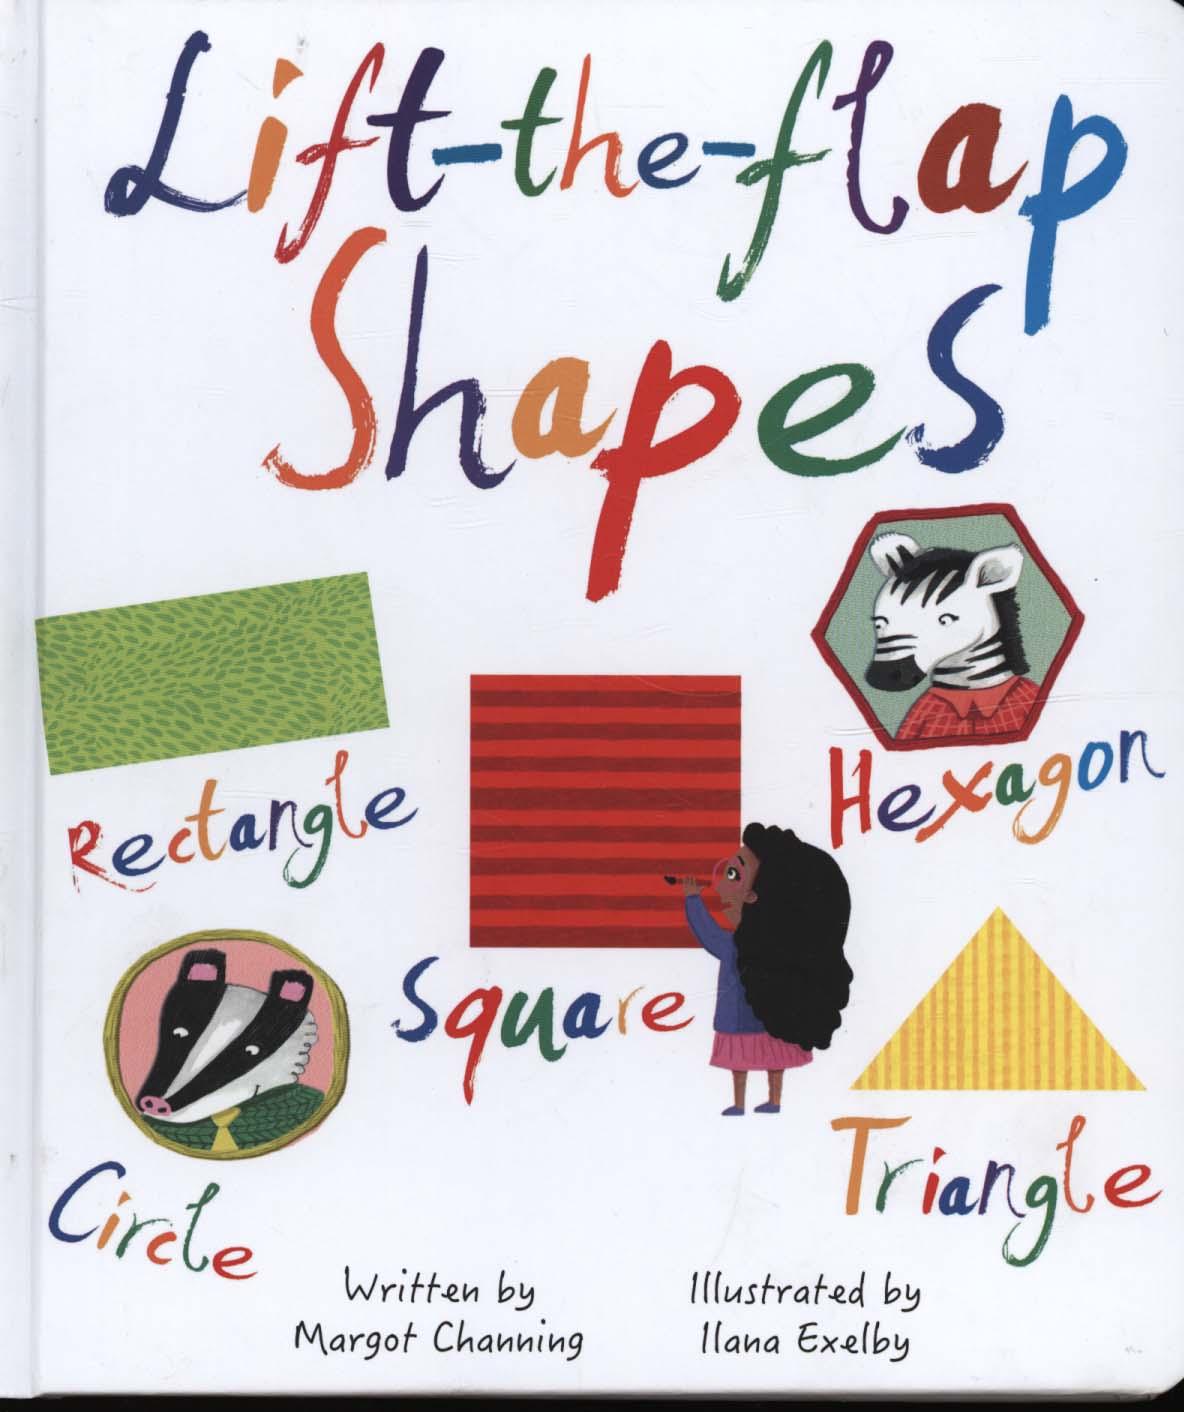 Lift-The-Flaps Shapes